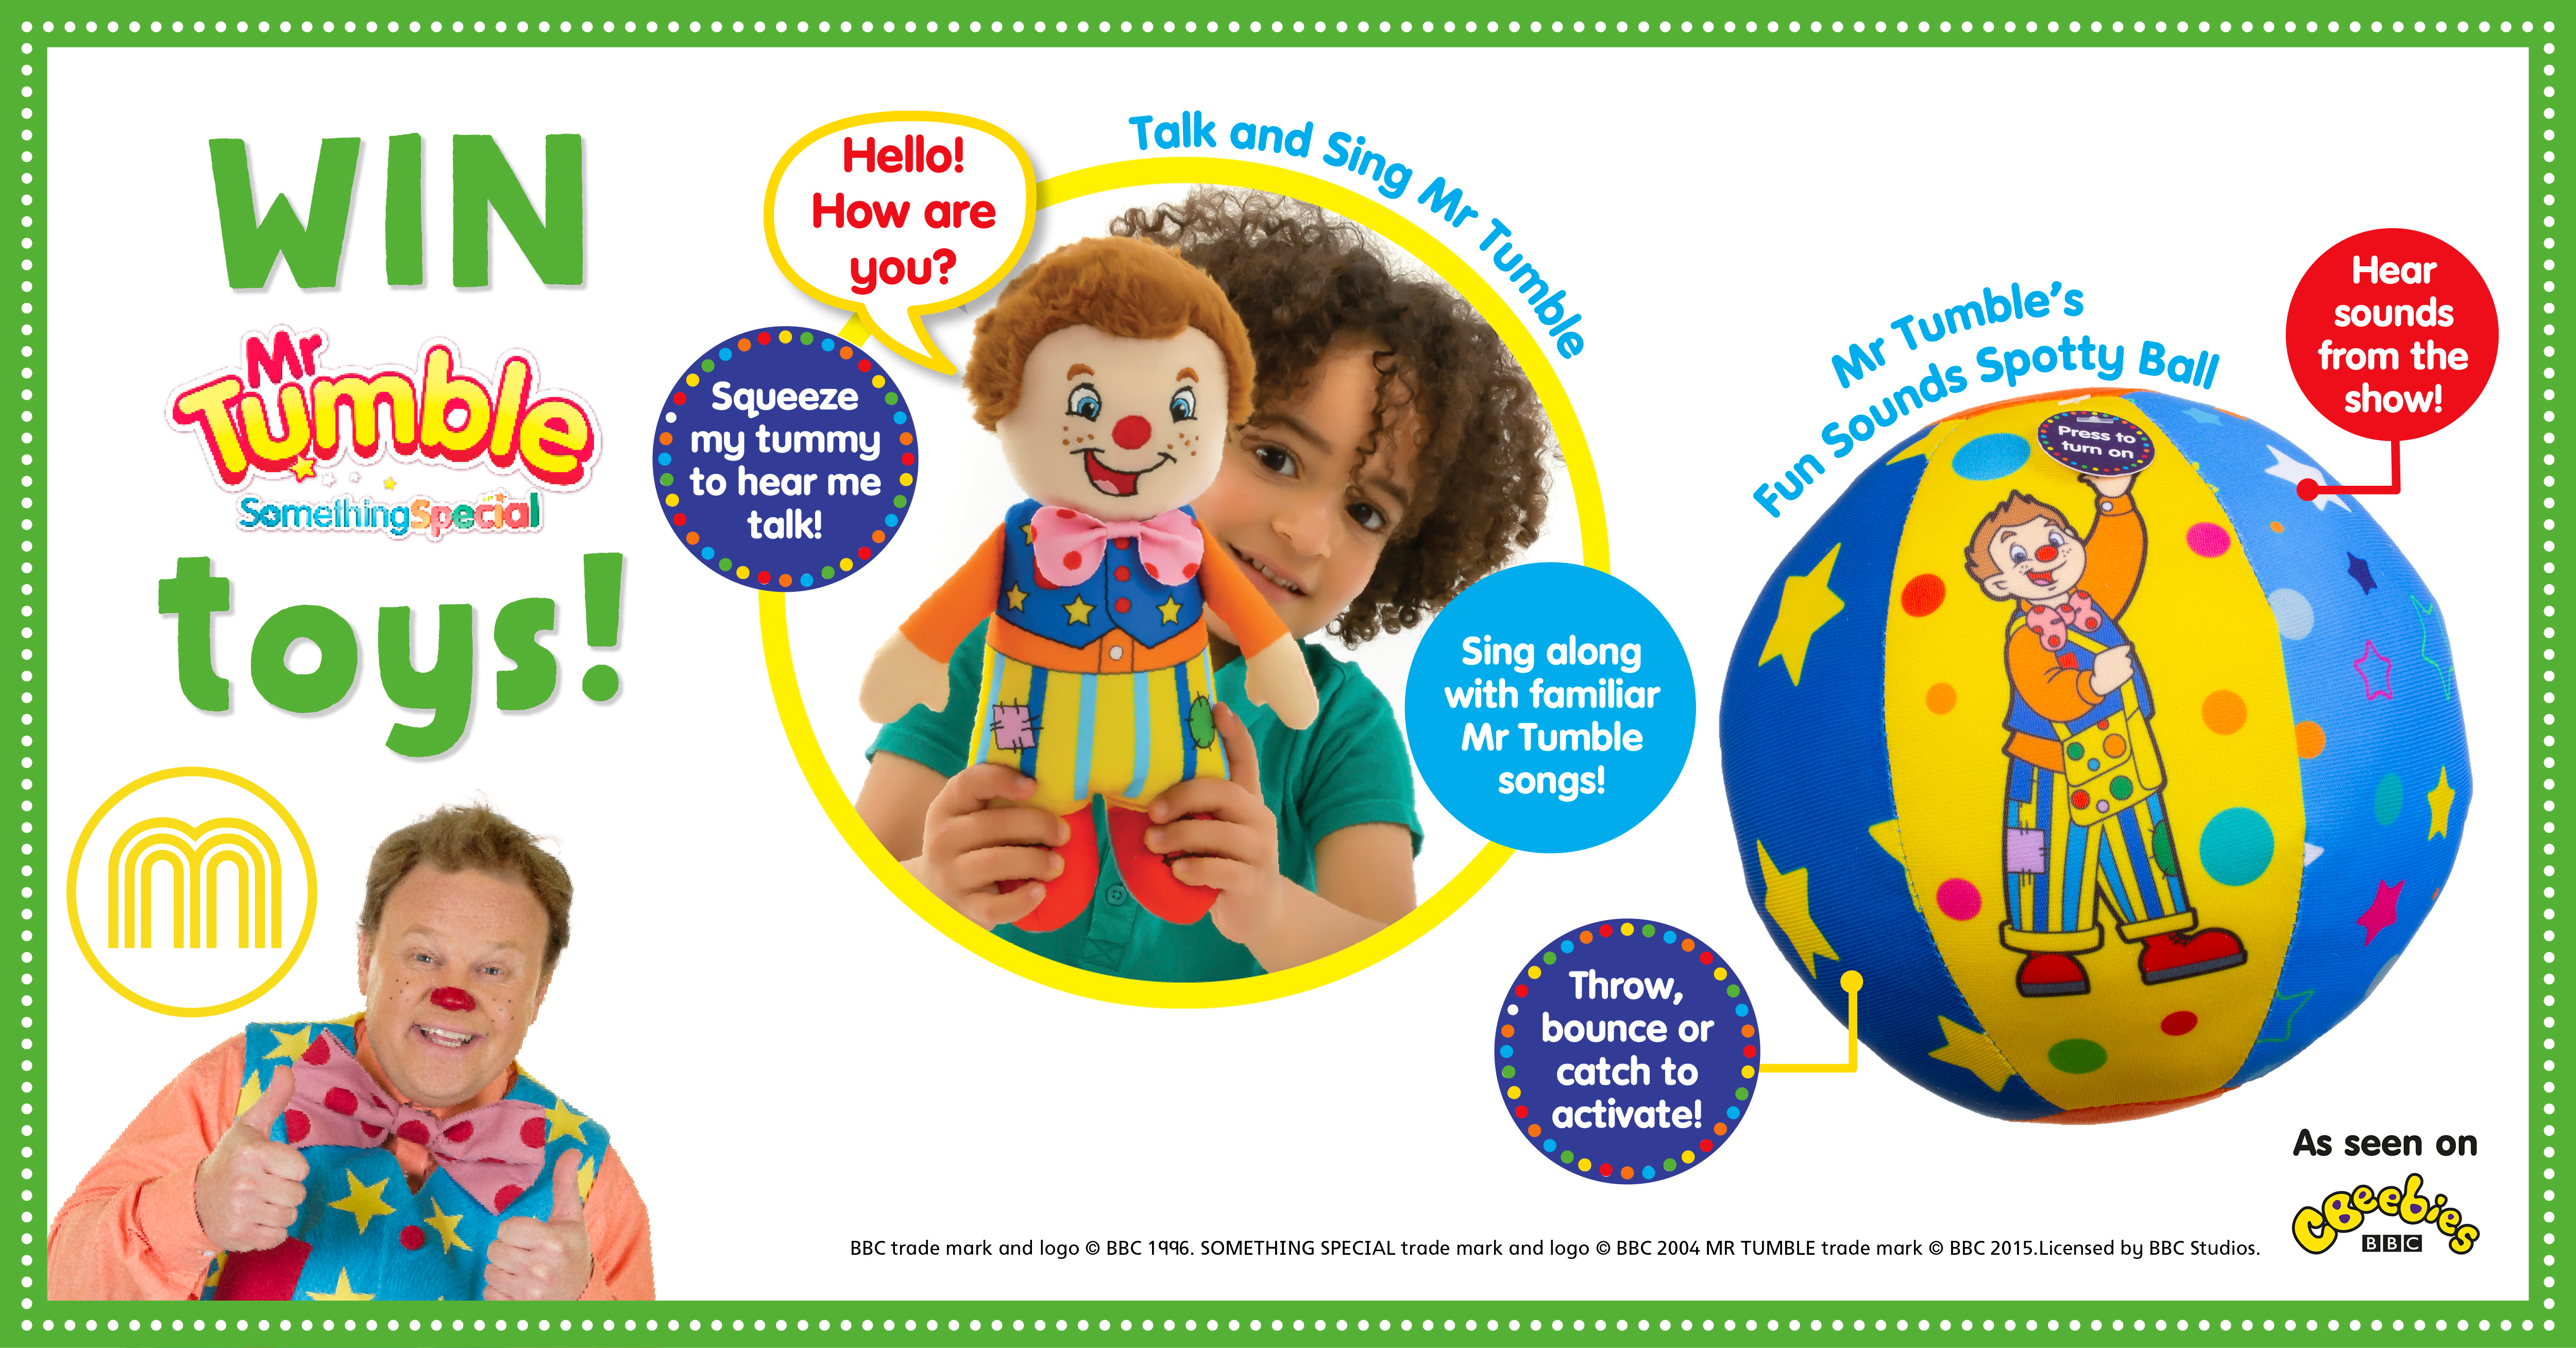 A young child holding a Mr Tumble doll, and a ball with a picture of Mr Tumble on it